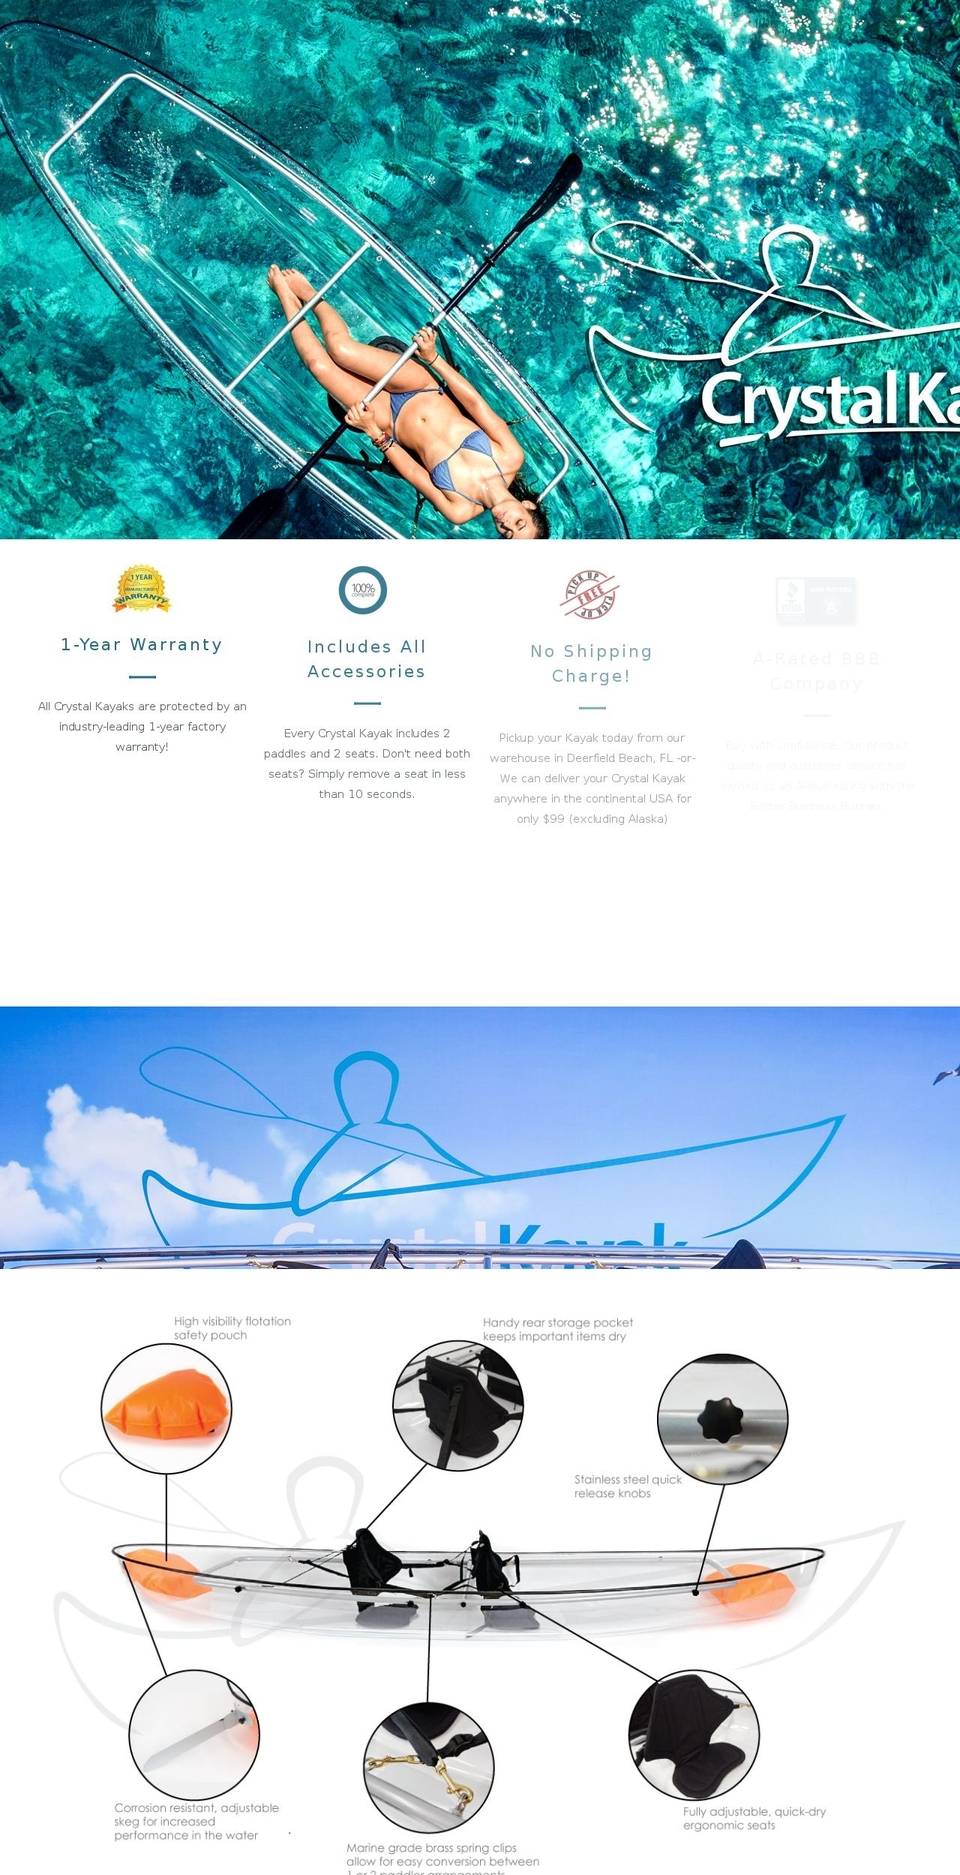 Motion Shopify theme site example crystalkayak.com